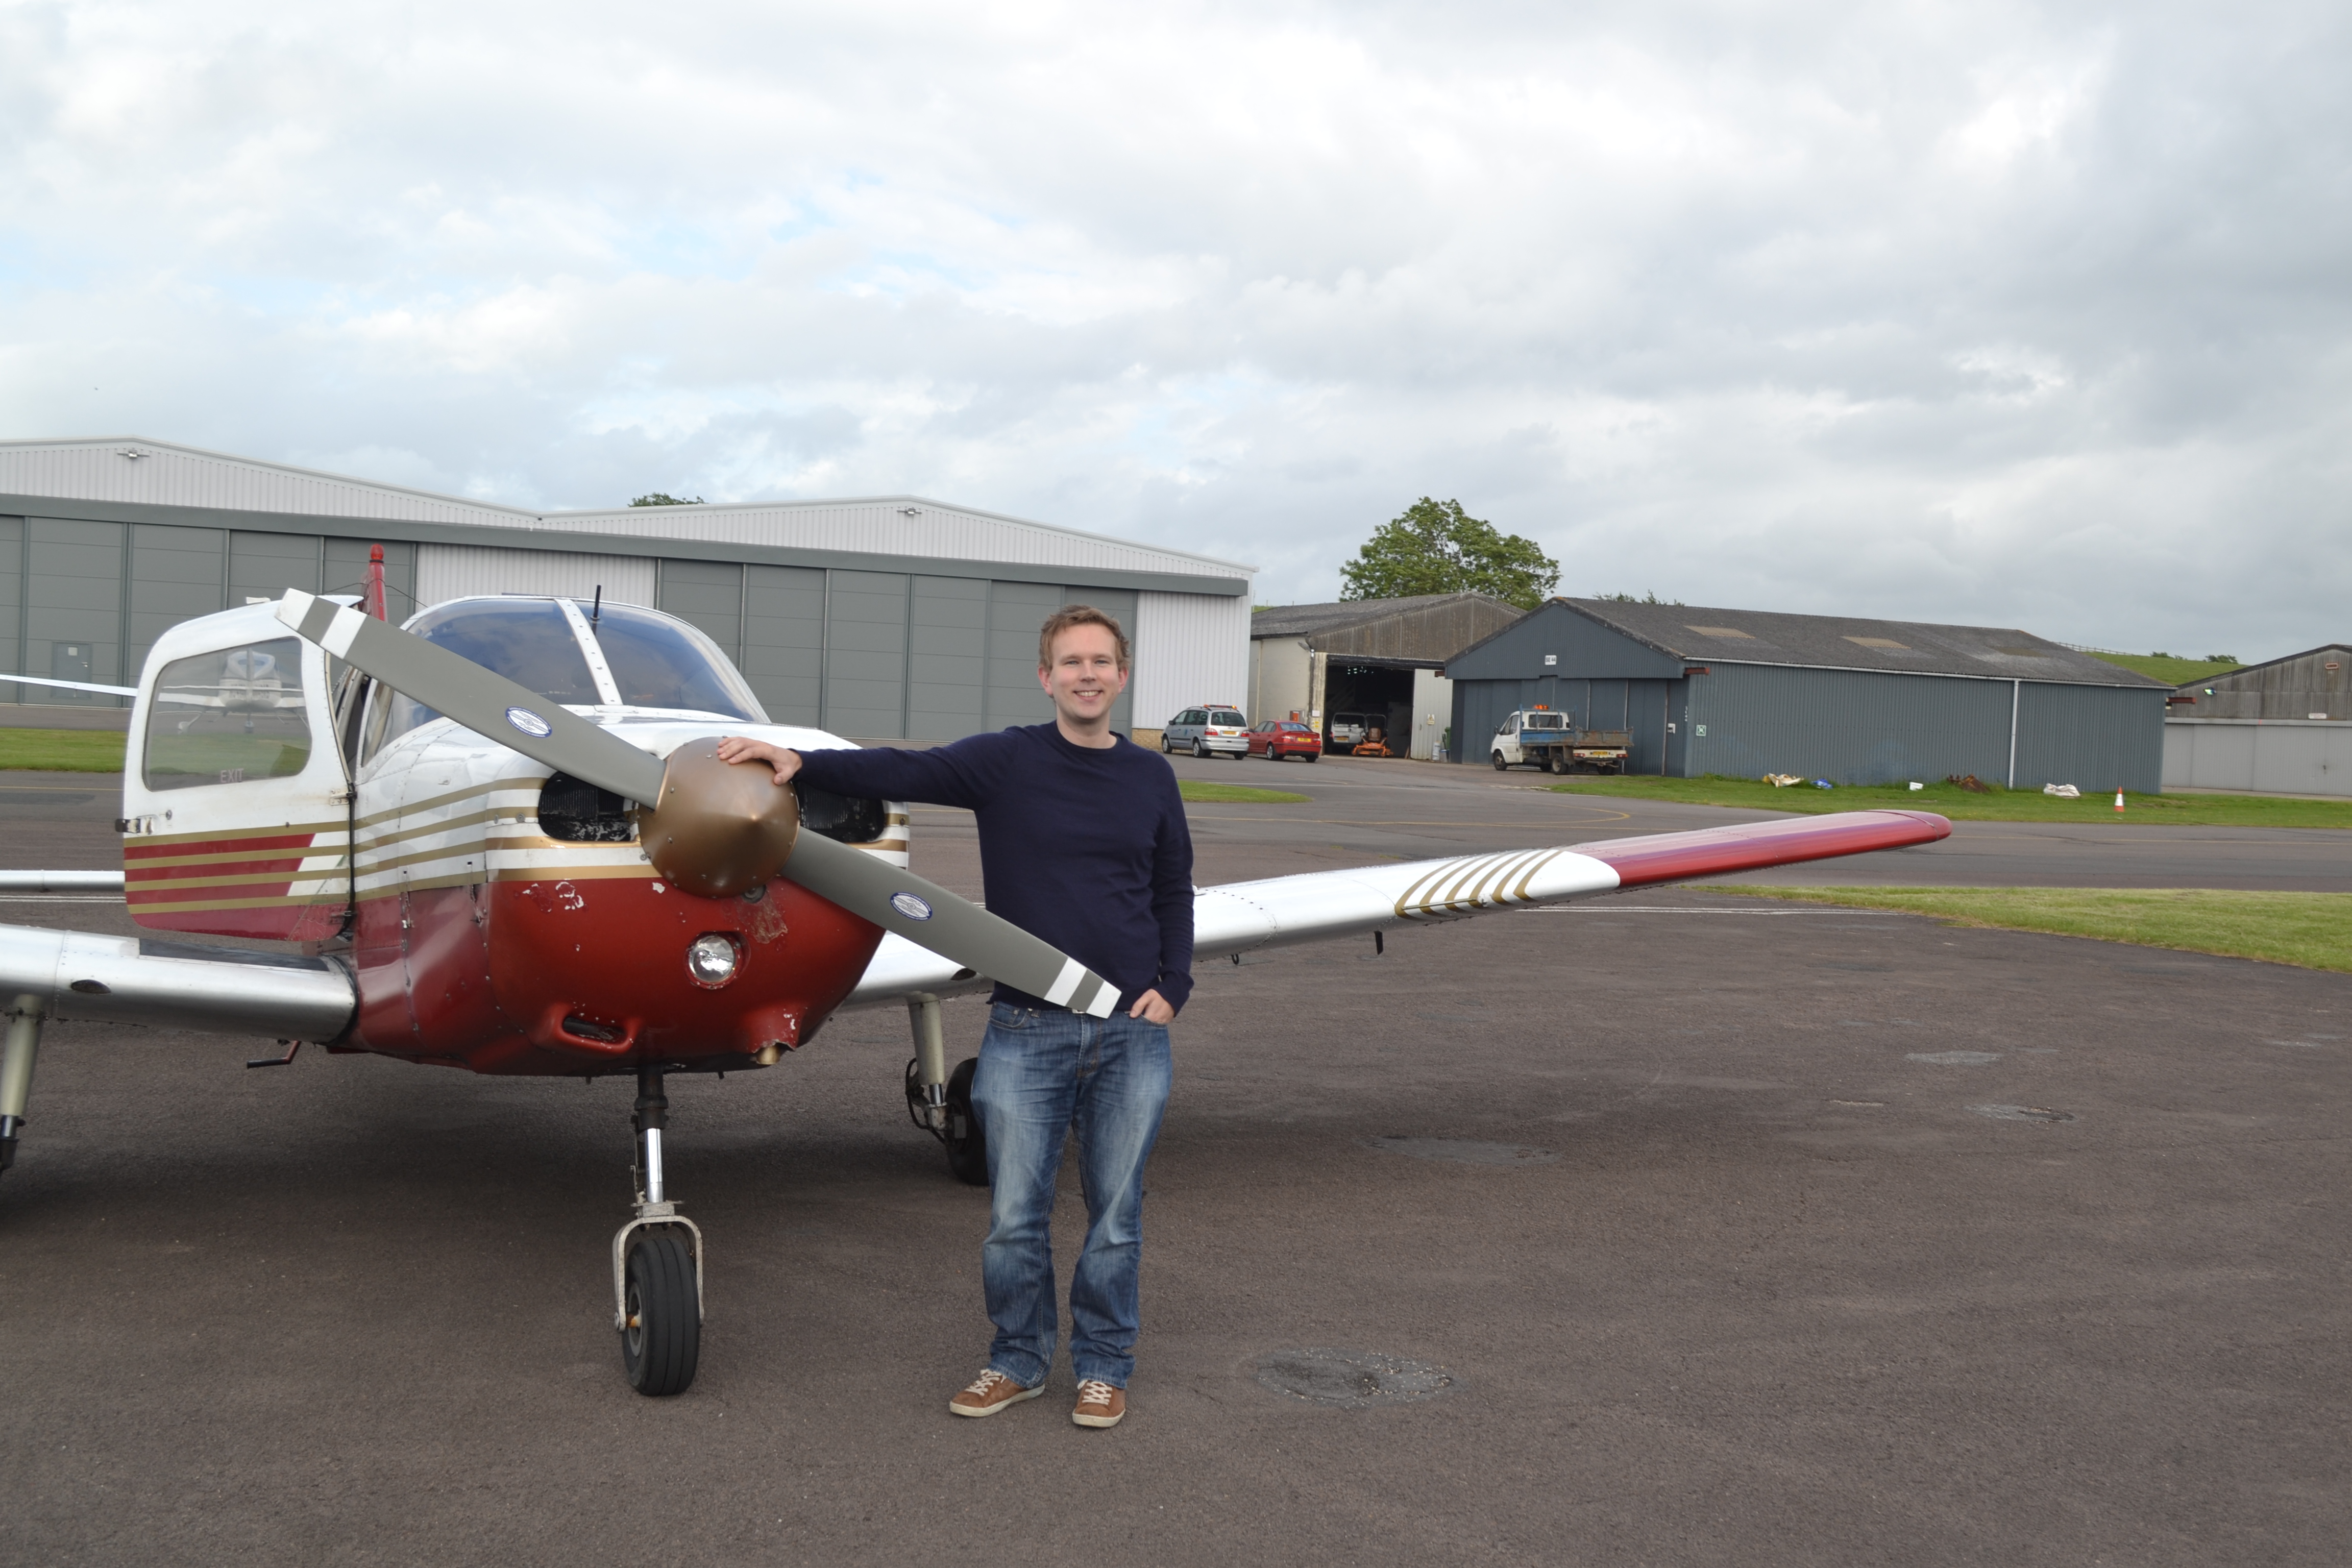 Me posing with the Piper Warrior after my first lesson